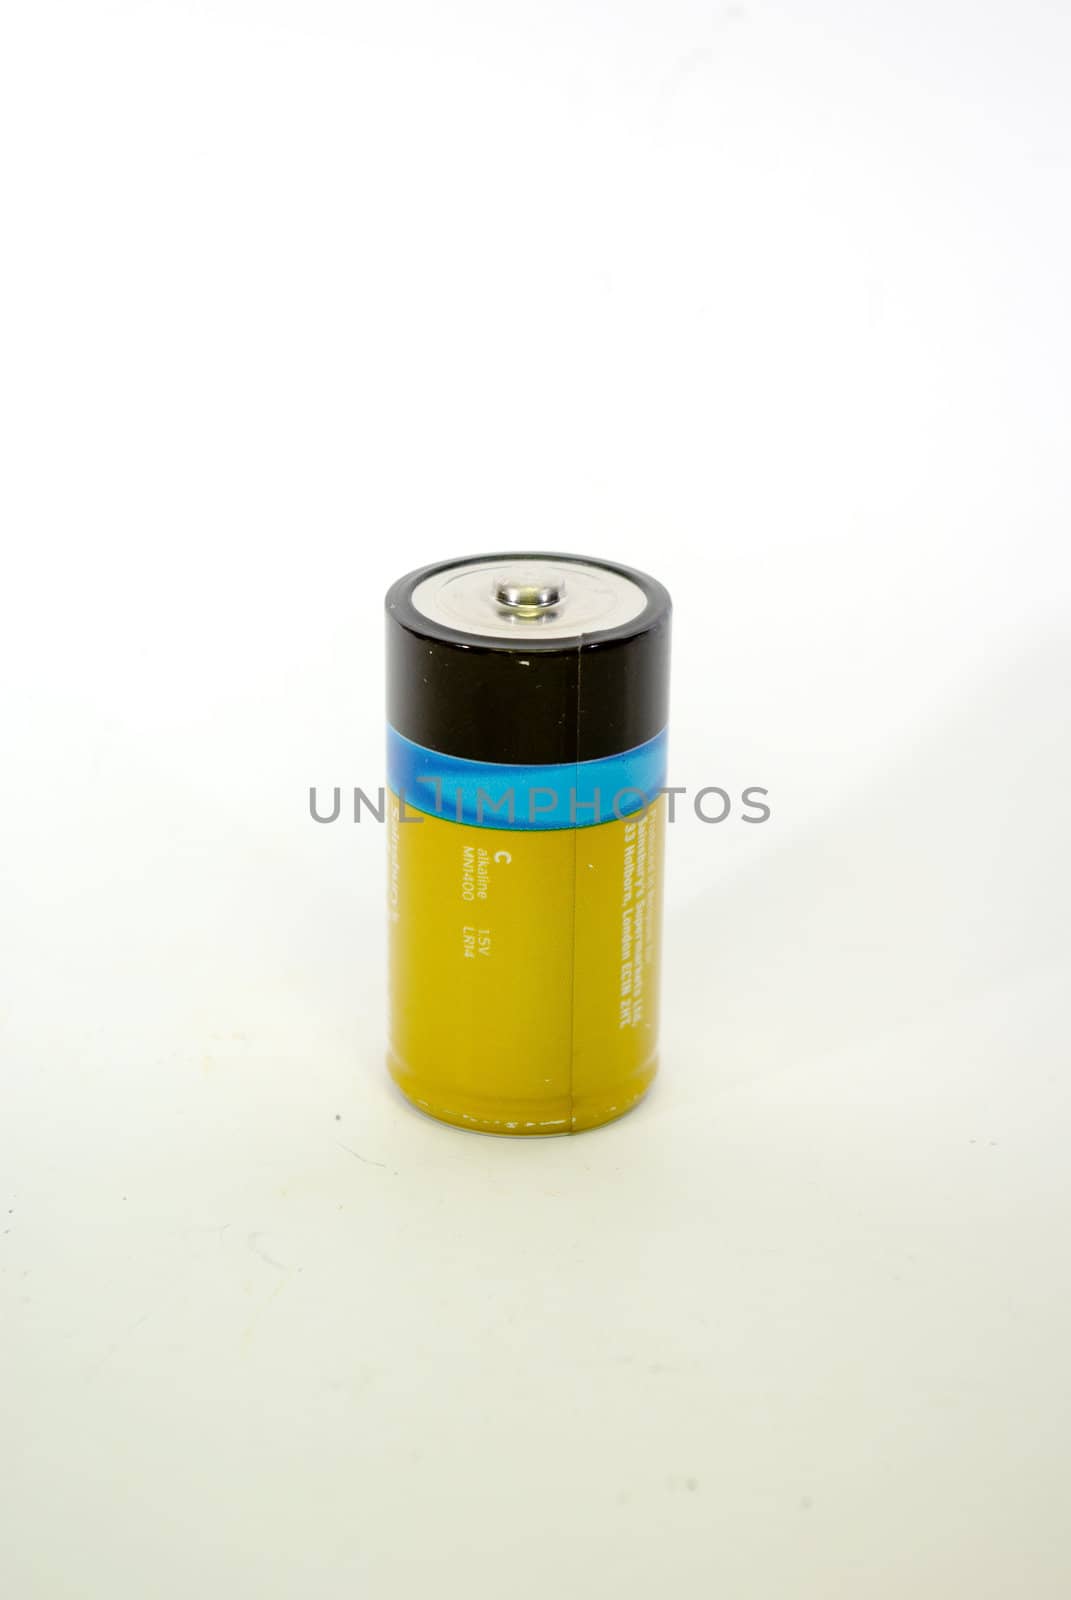 1.5volt battery for use in portable equipment